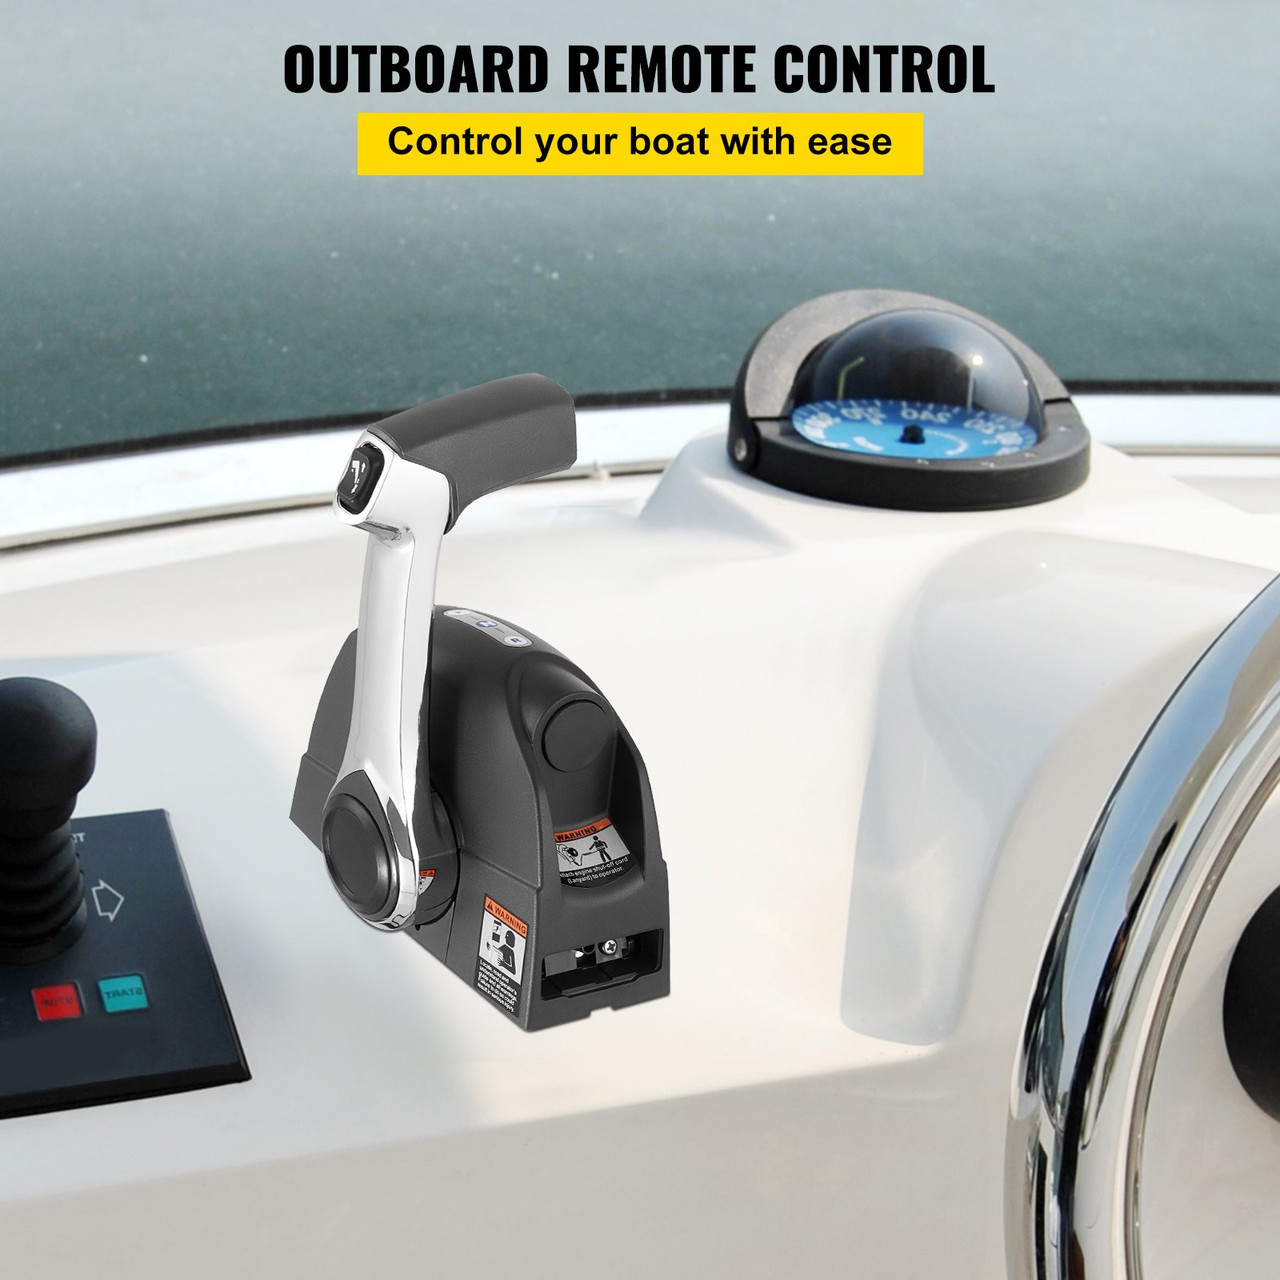 Throttle Outboard Remote Control 5006182 Side Mount For Brp Johnson Evinrude